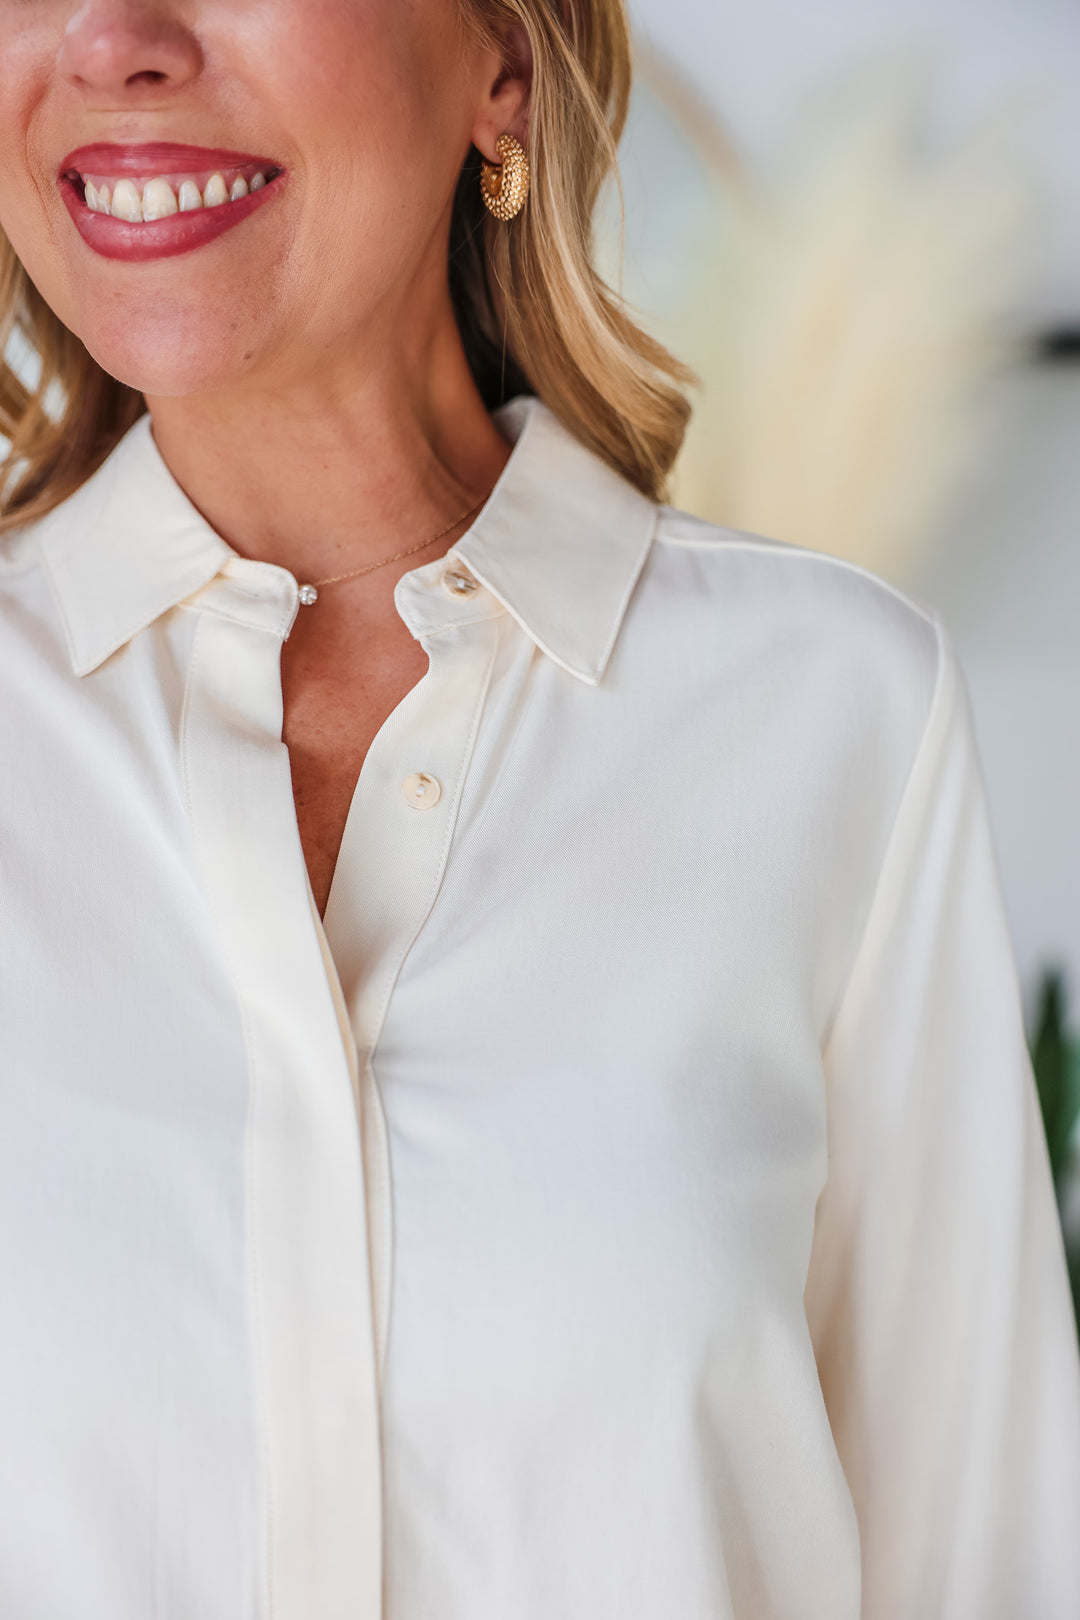 A closeup of the shoulder of a woman wearing a cream colored button down.